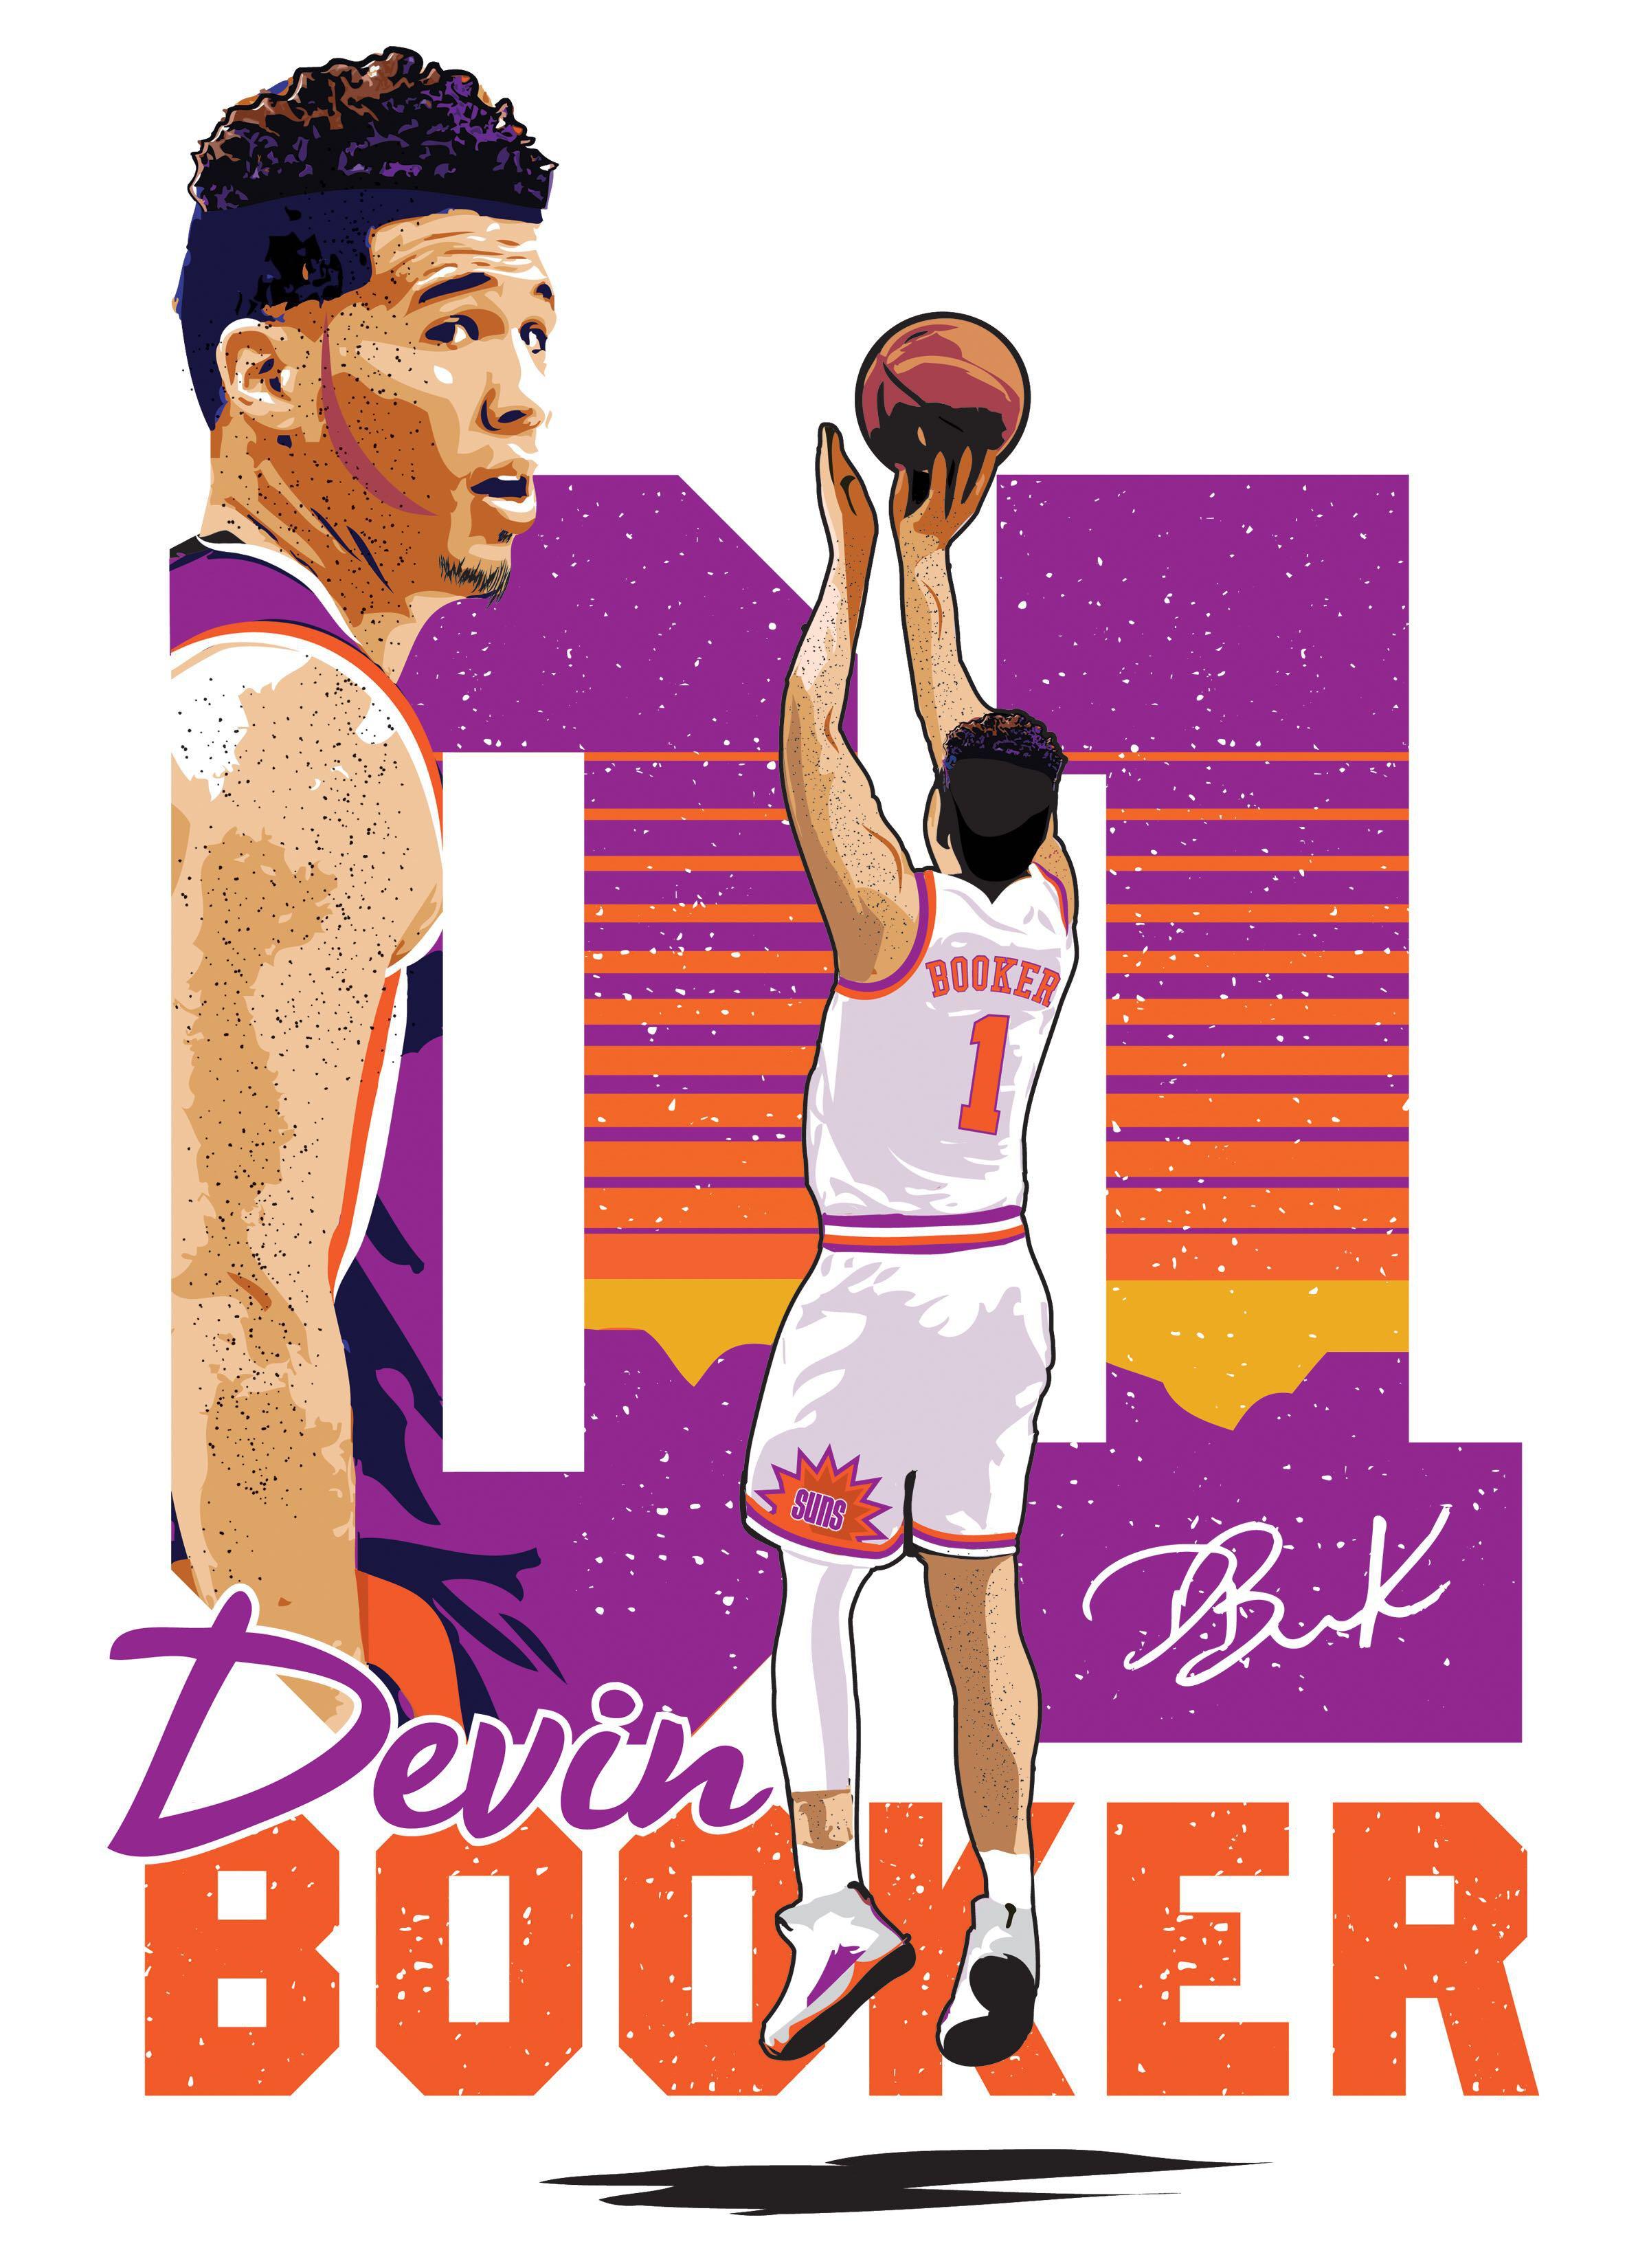 My new Devin Booker tee design. I've been working on this